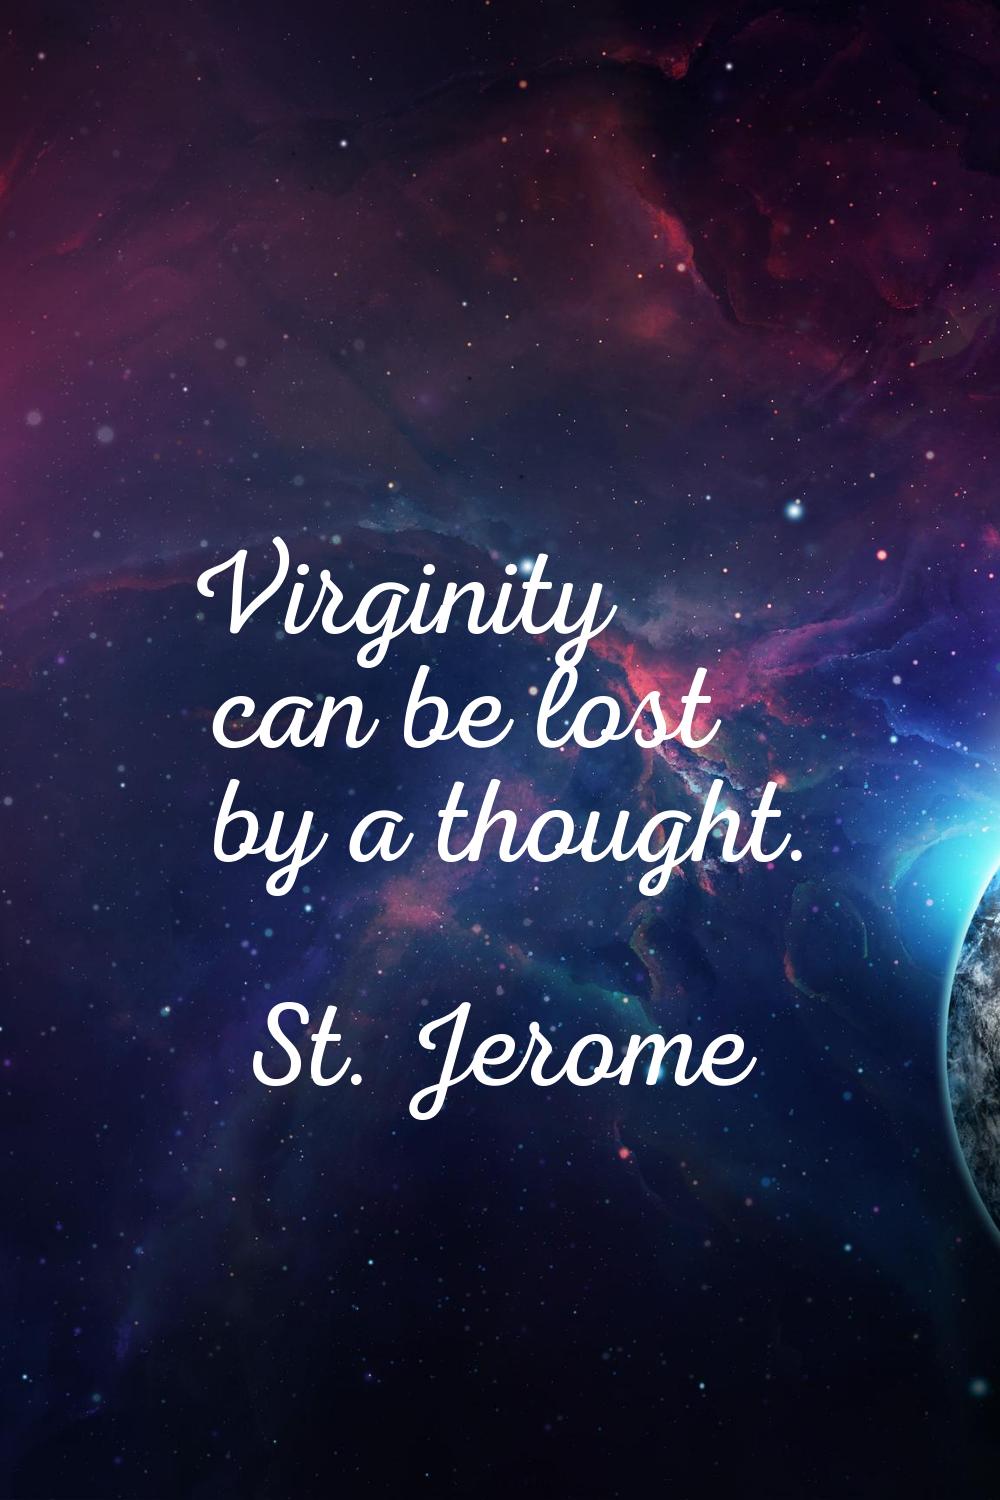 Virginity can be lost by a thought.